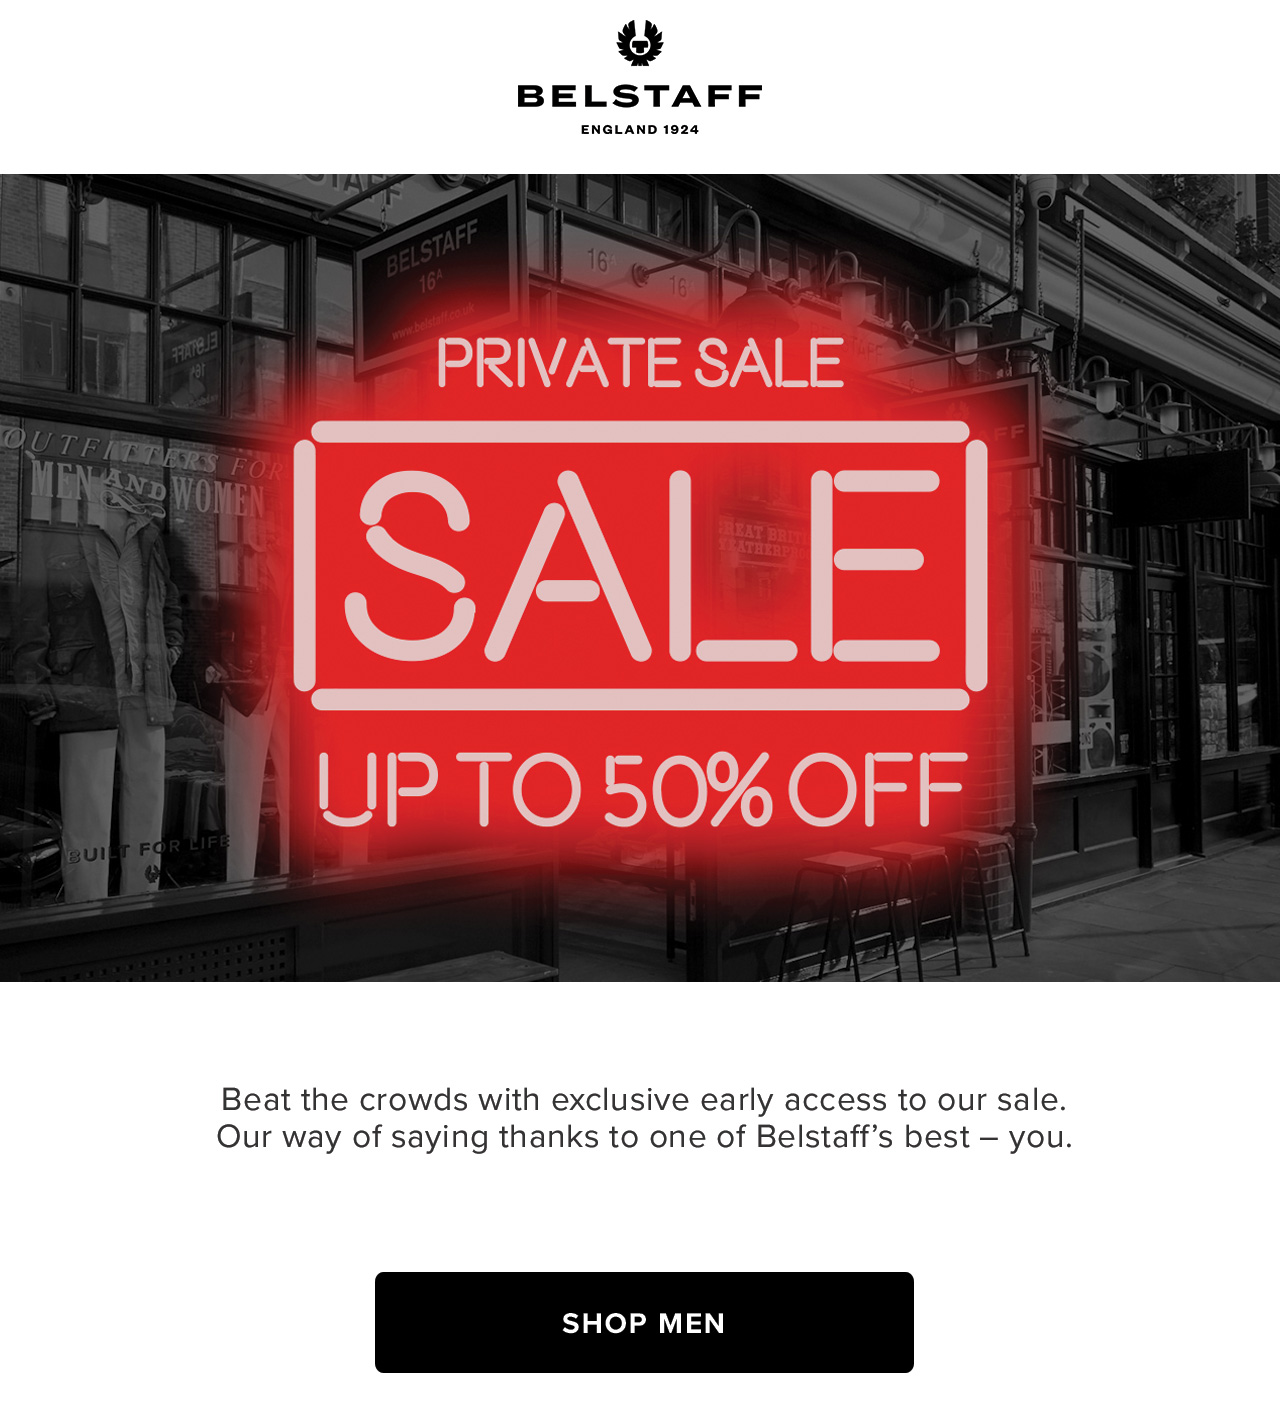 Private Sale - Up to 50% off